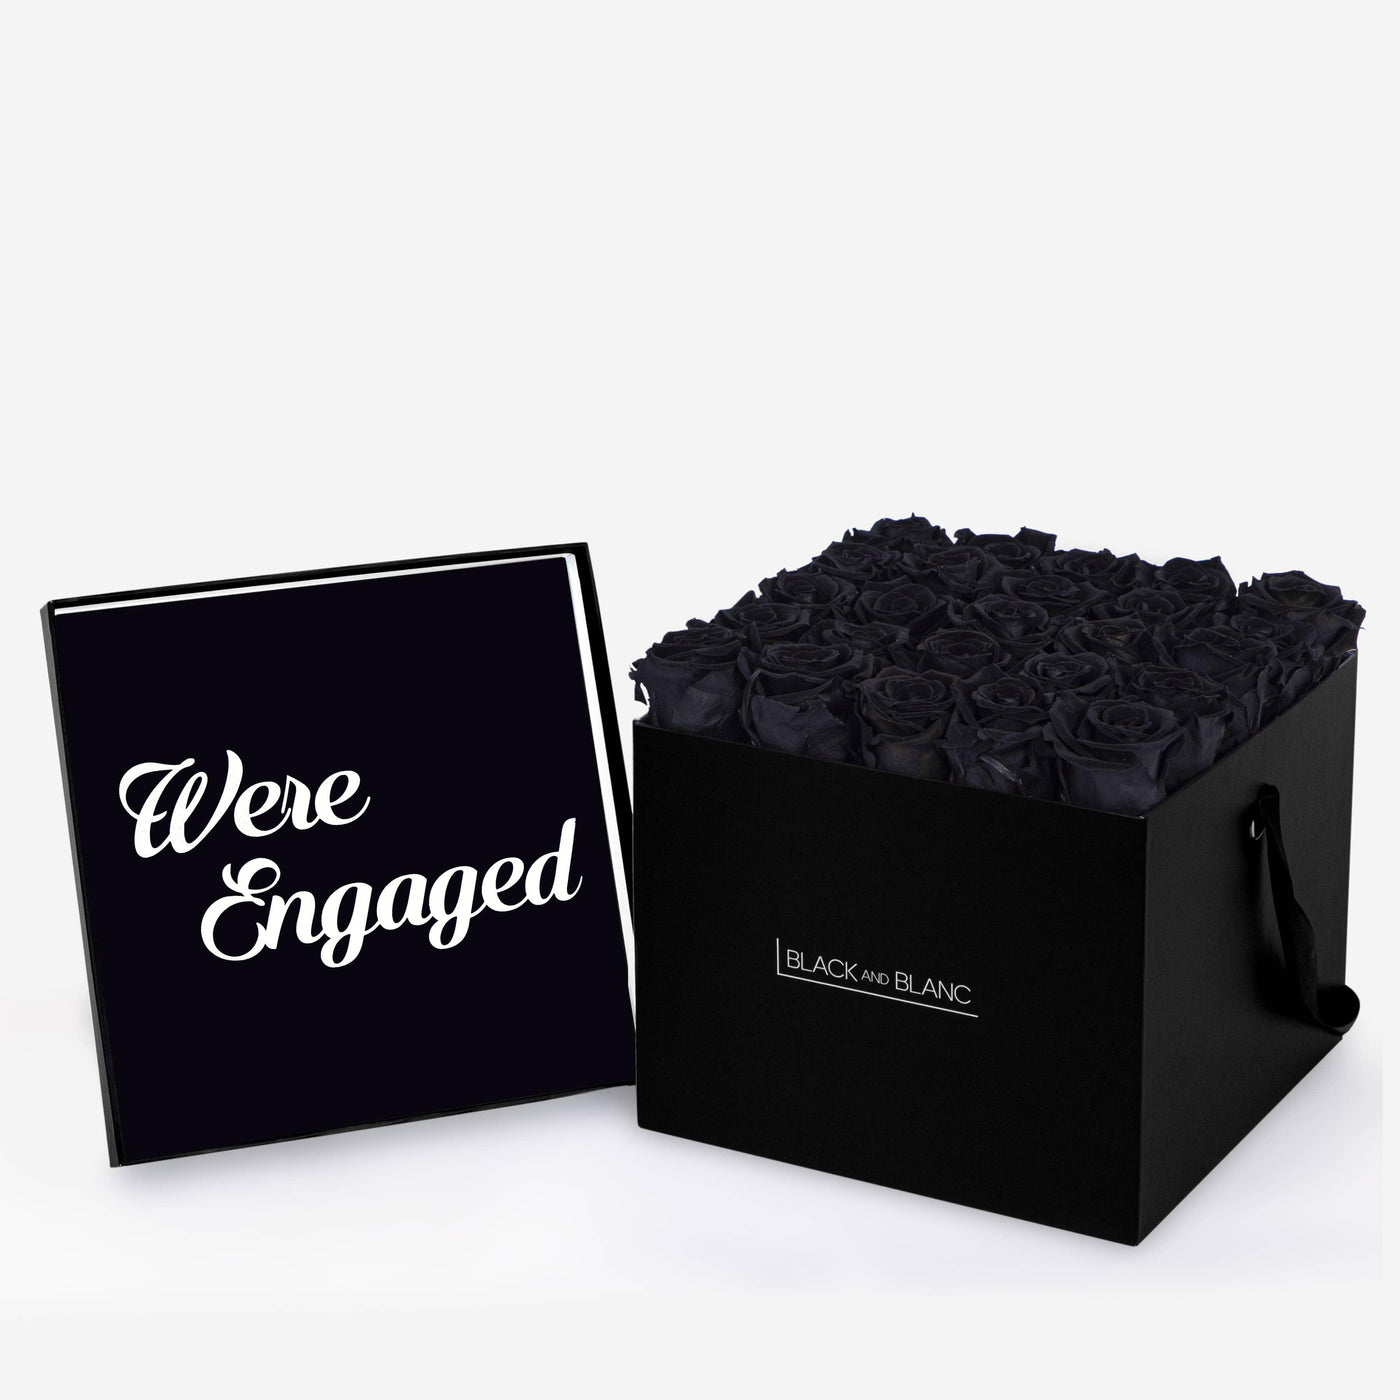 Infinity Texte de Fleur - We're Engaged - BLACK AND BLANC